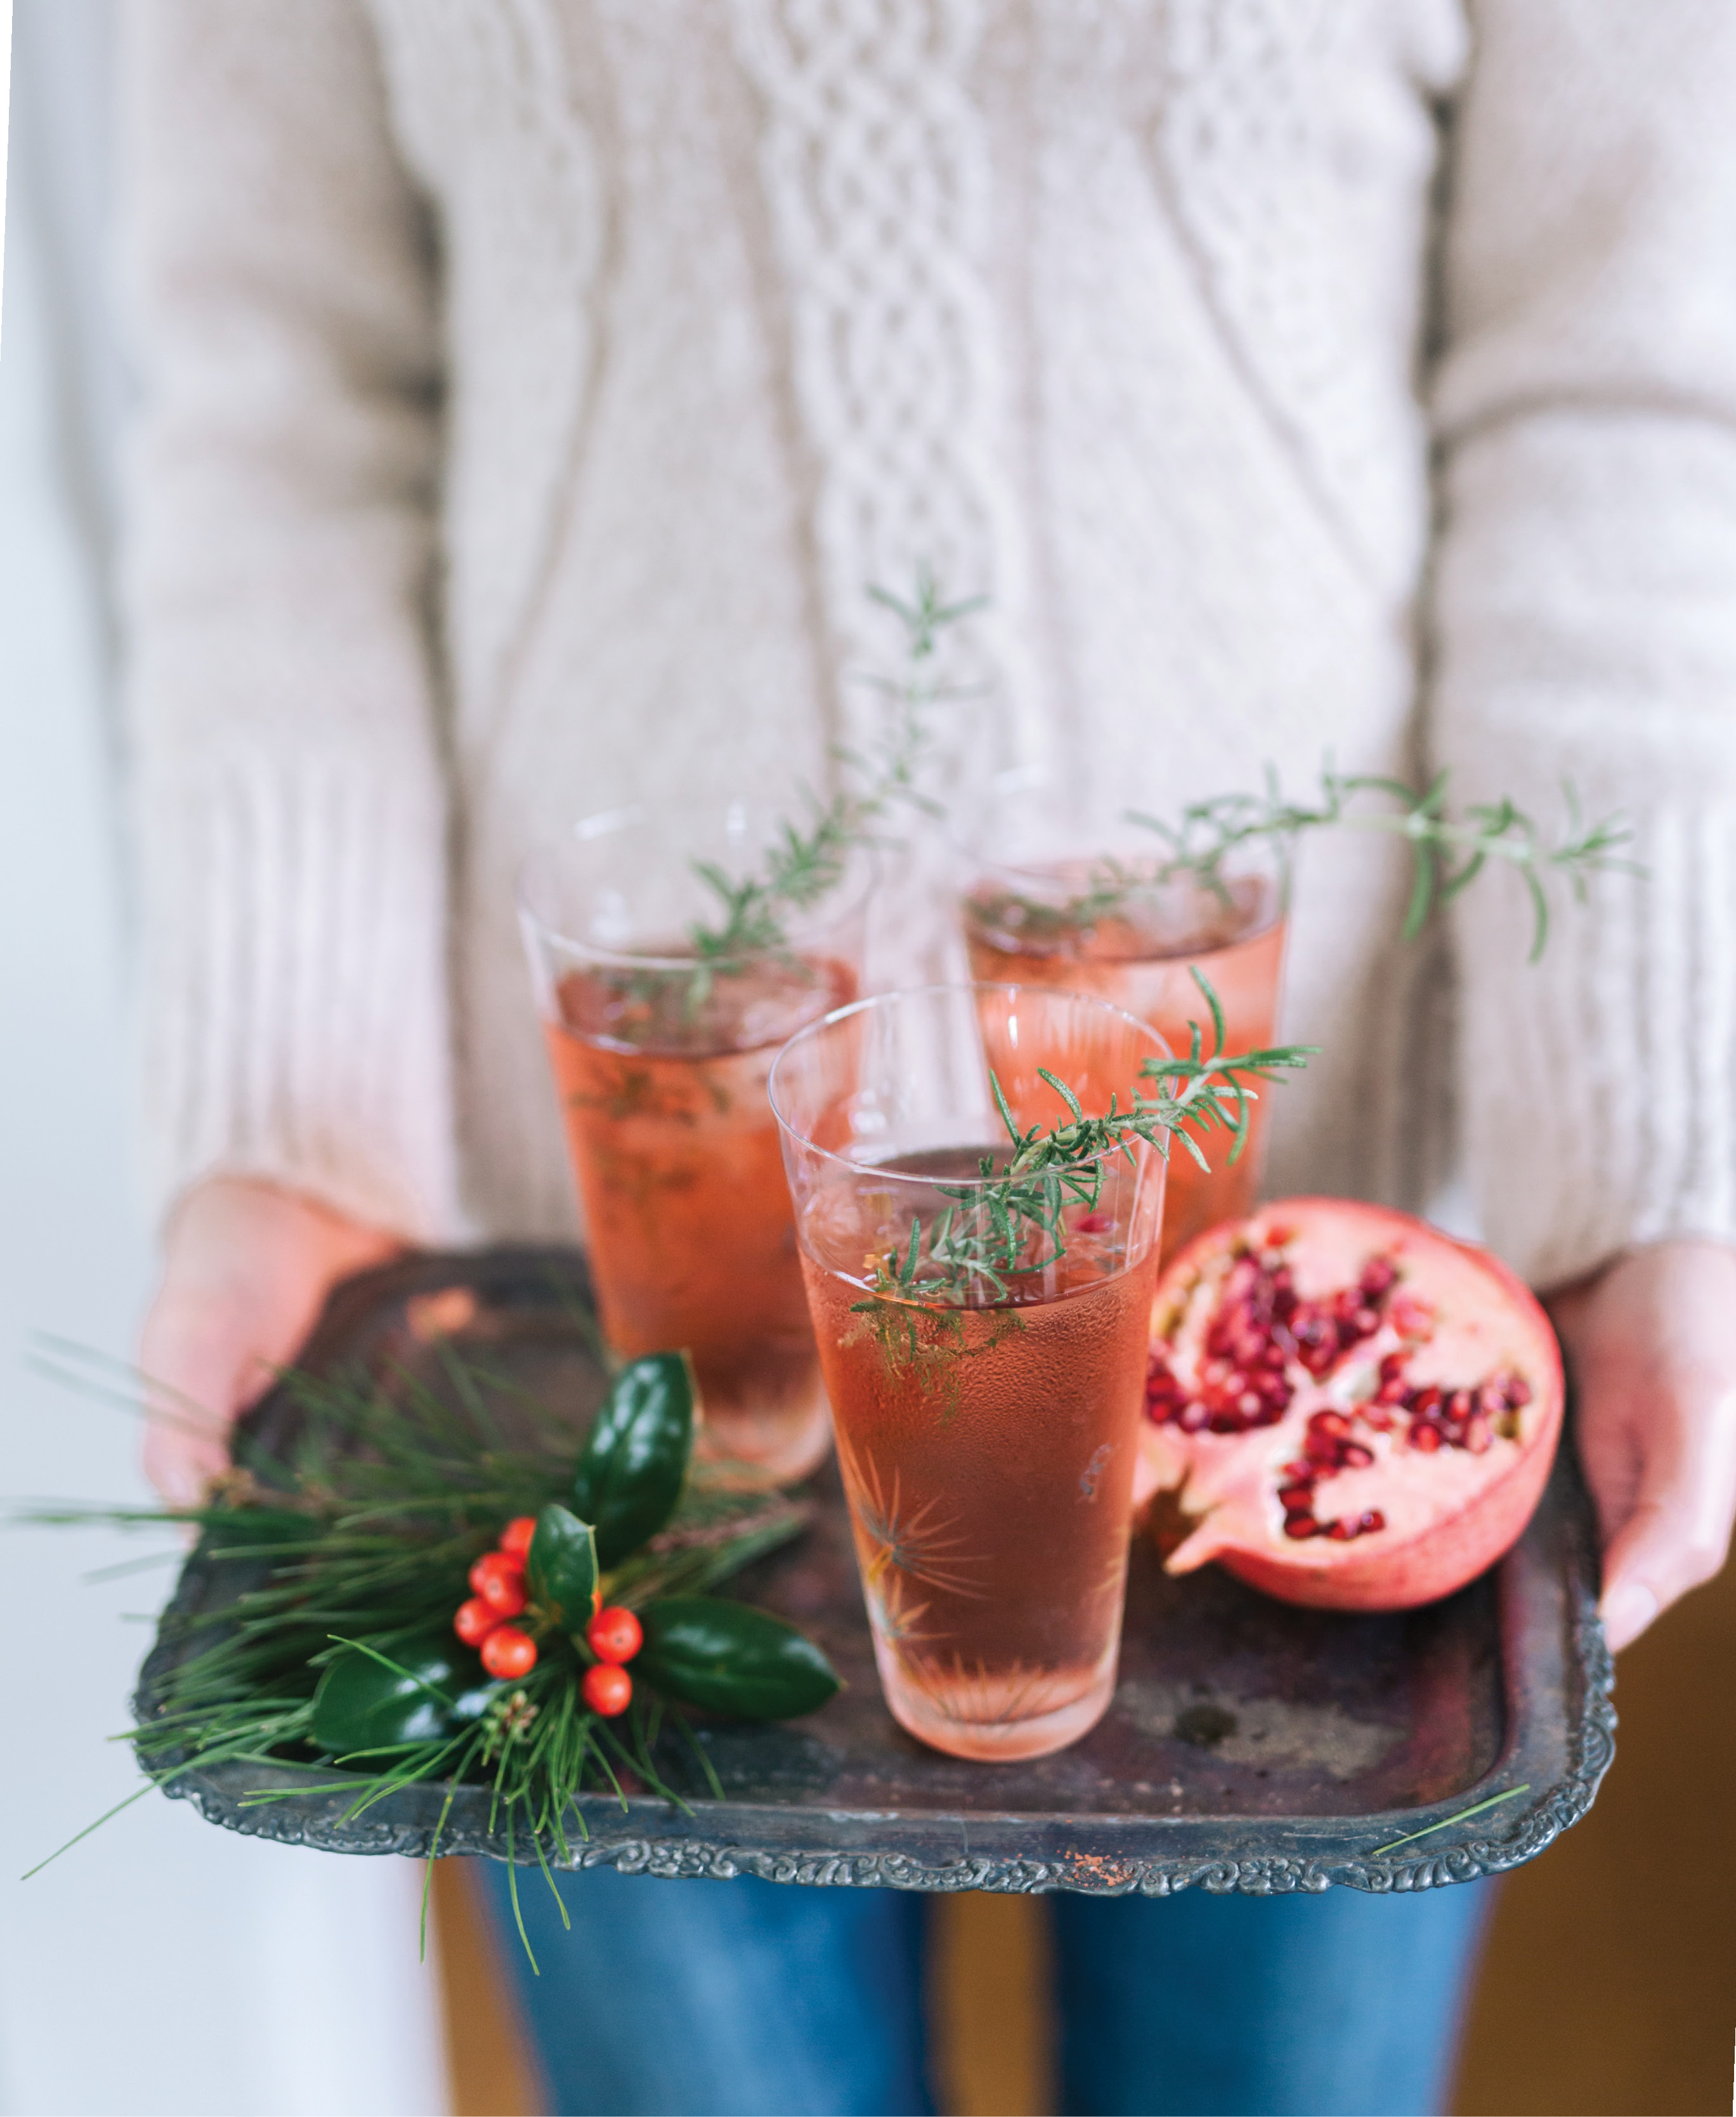 Offer guests a special cocktail, like this pomegranate spritz, as soon as they walk in the door, but do have other options available, as well.